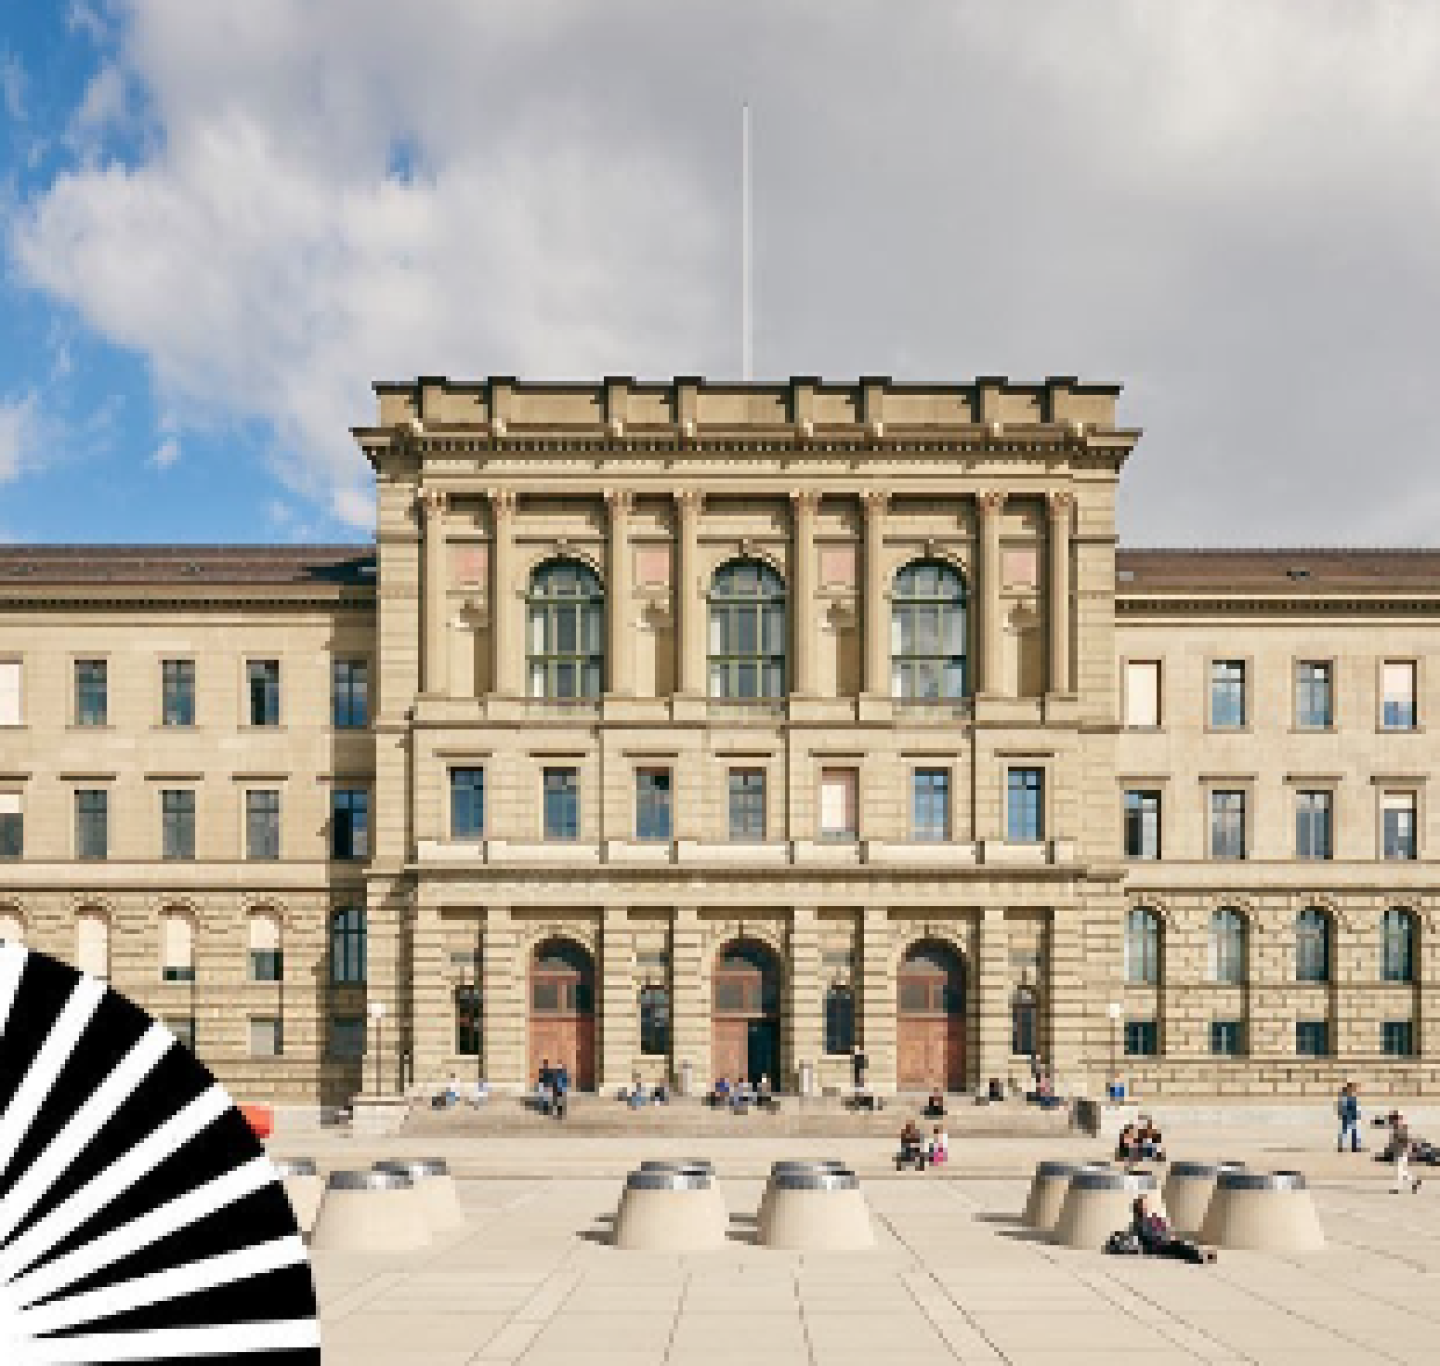 The main building of ETH Zurich